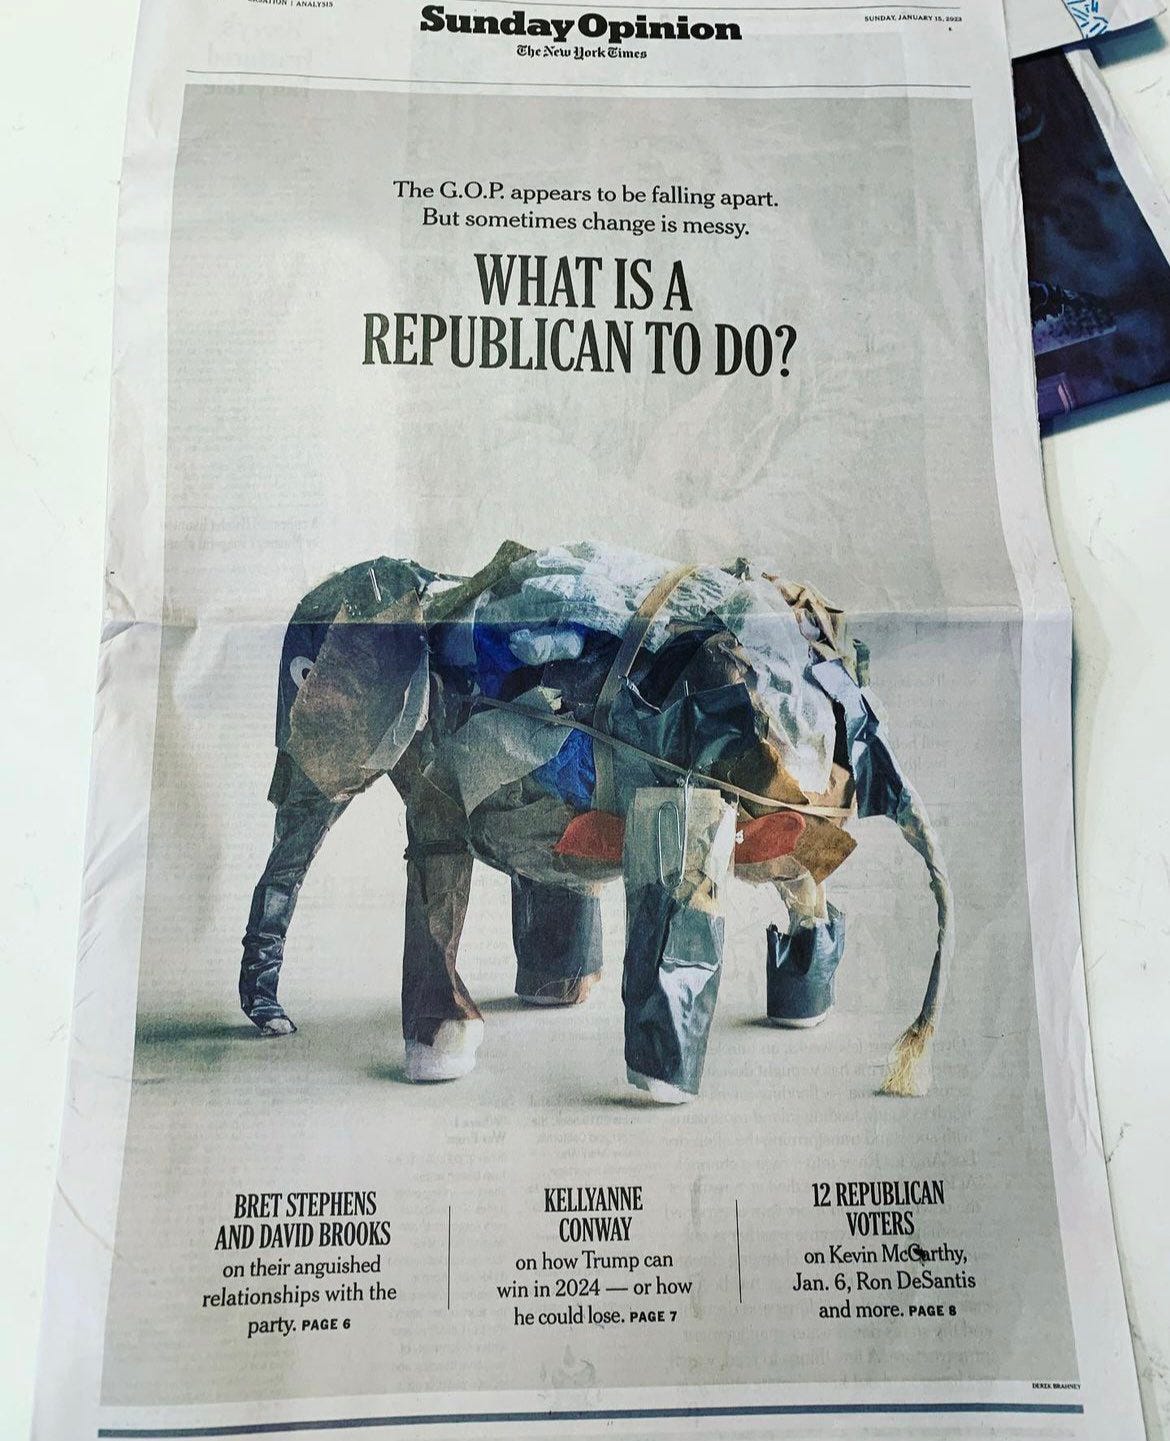 Times Sunday Opinion front page. Kicker: The G.O.P. appears to be falling apart. But sometimes change is messy. WHAT IS A REPUBLICAN TO DO? Stories: BRET STEPHENS AND DAVID BROOKS on their anguished relationships with the party. KELLYANNE CONWAY on how Trump can win in 2024 - or how he could lose. 12 REPUBLICAN VOTERS on Kevin McCarthy, Jan. 6, Ron DeSantis and more. 